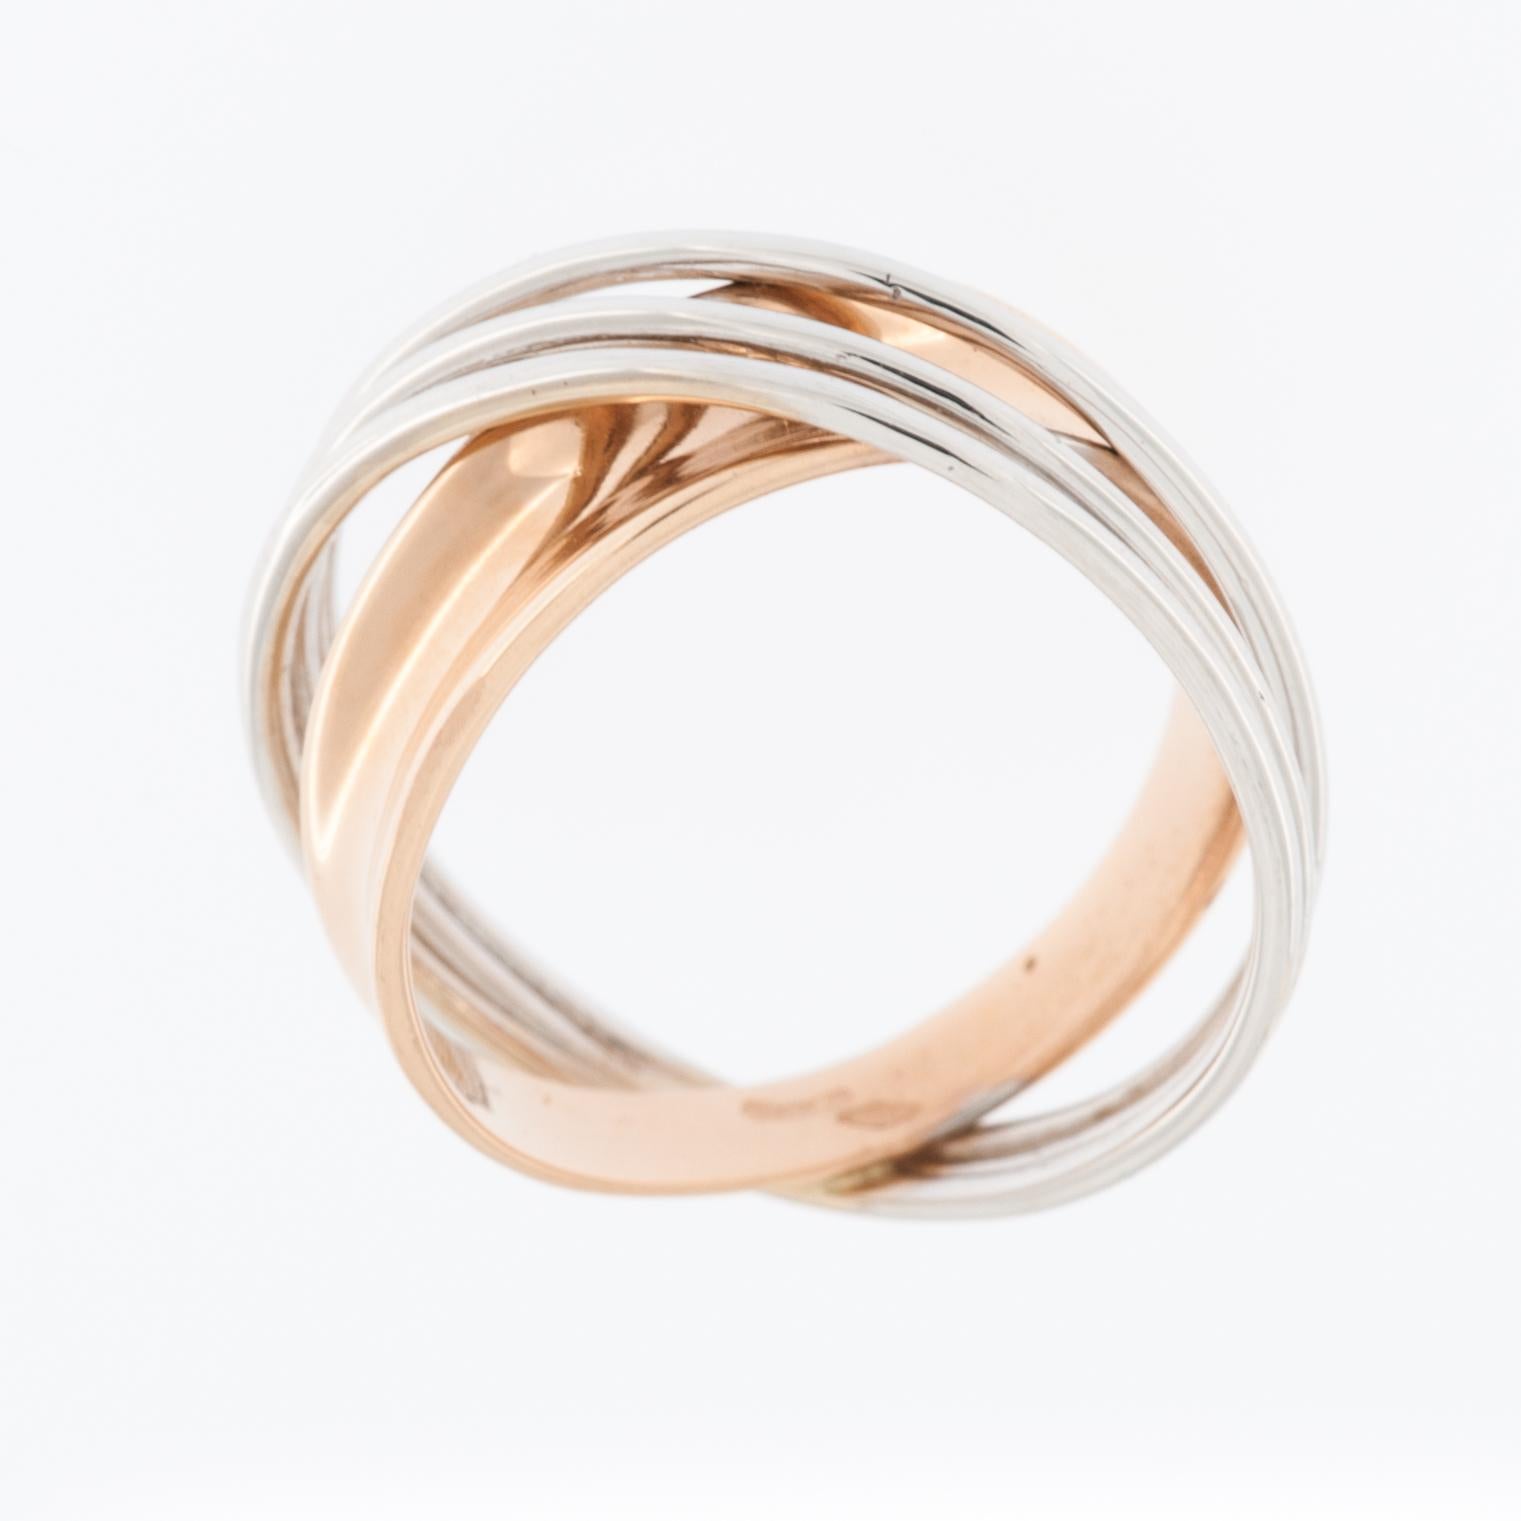 The Italian Modern 18kt White and Rose Gold Ring is a stunning piece of jewelry that combines contemporary design with the timeless elegance of gold. 
The ring is crafted from high-quality 18-karat white and rose gold. This blend of gold alloys